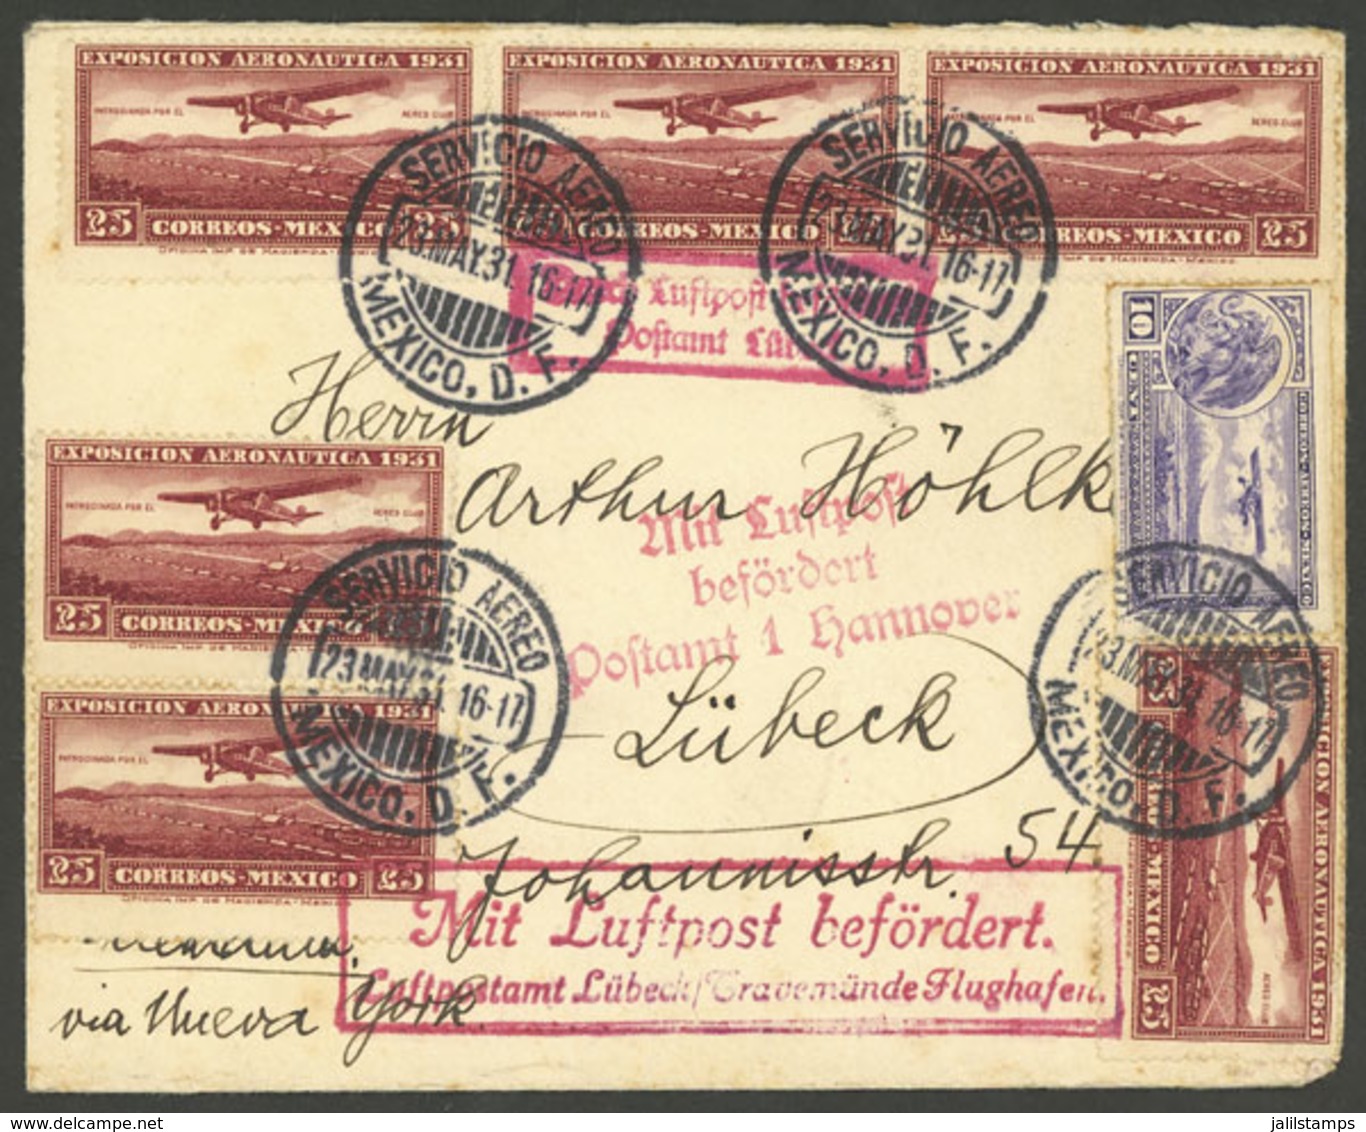 MEXICO: 23/MAY/1931 México - Germany, Airmail Cover With Very Nice Postage And On Back Special Handstamp Of Aeronautics  - México